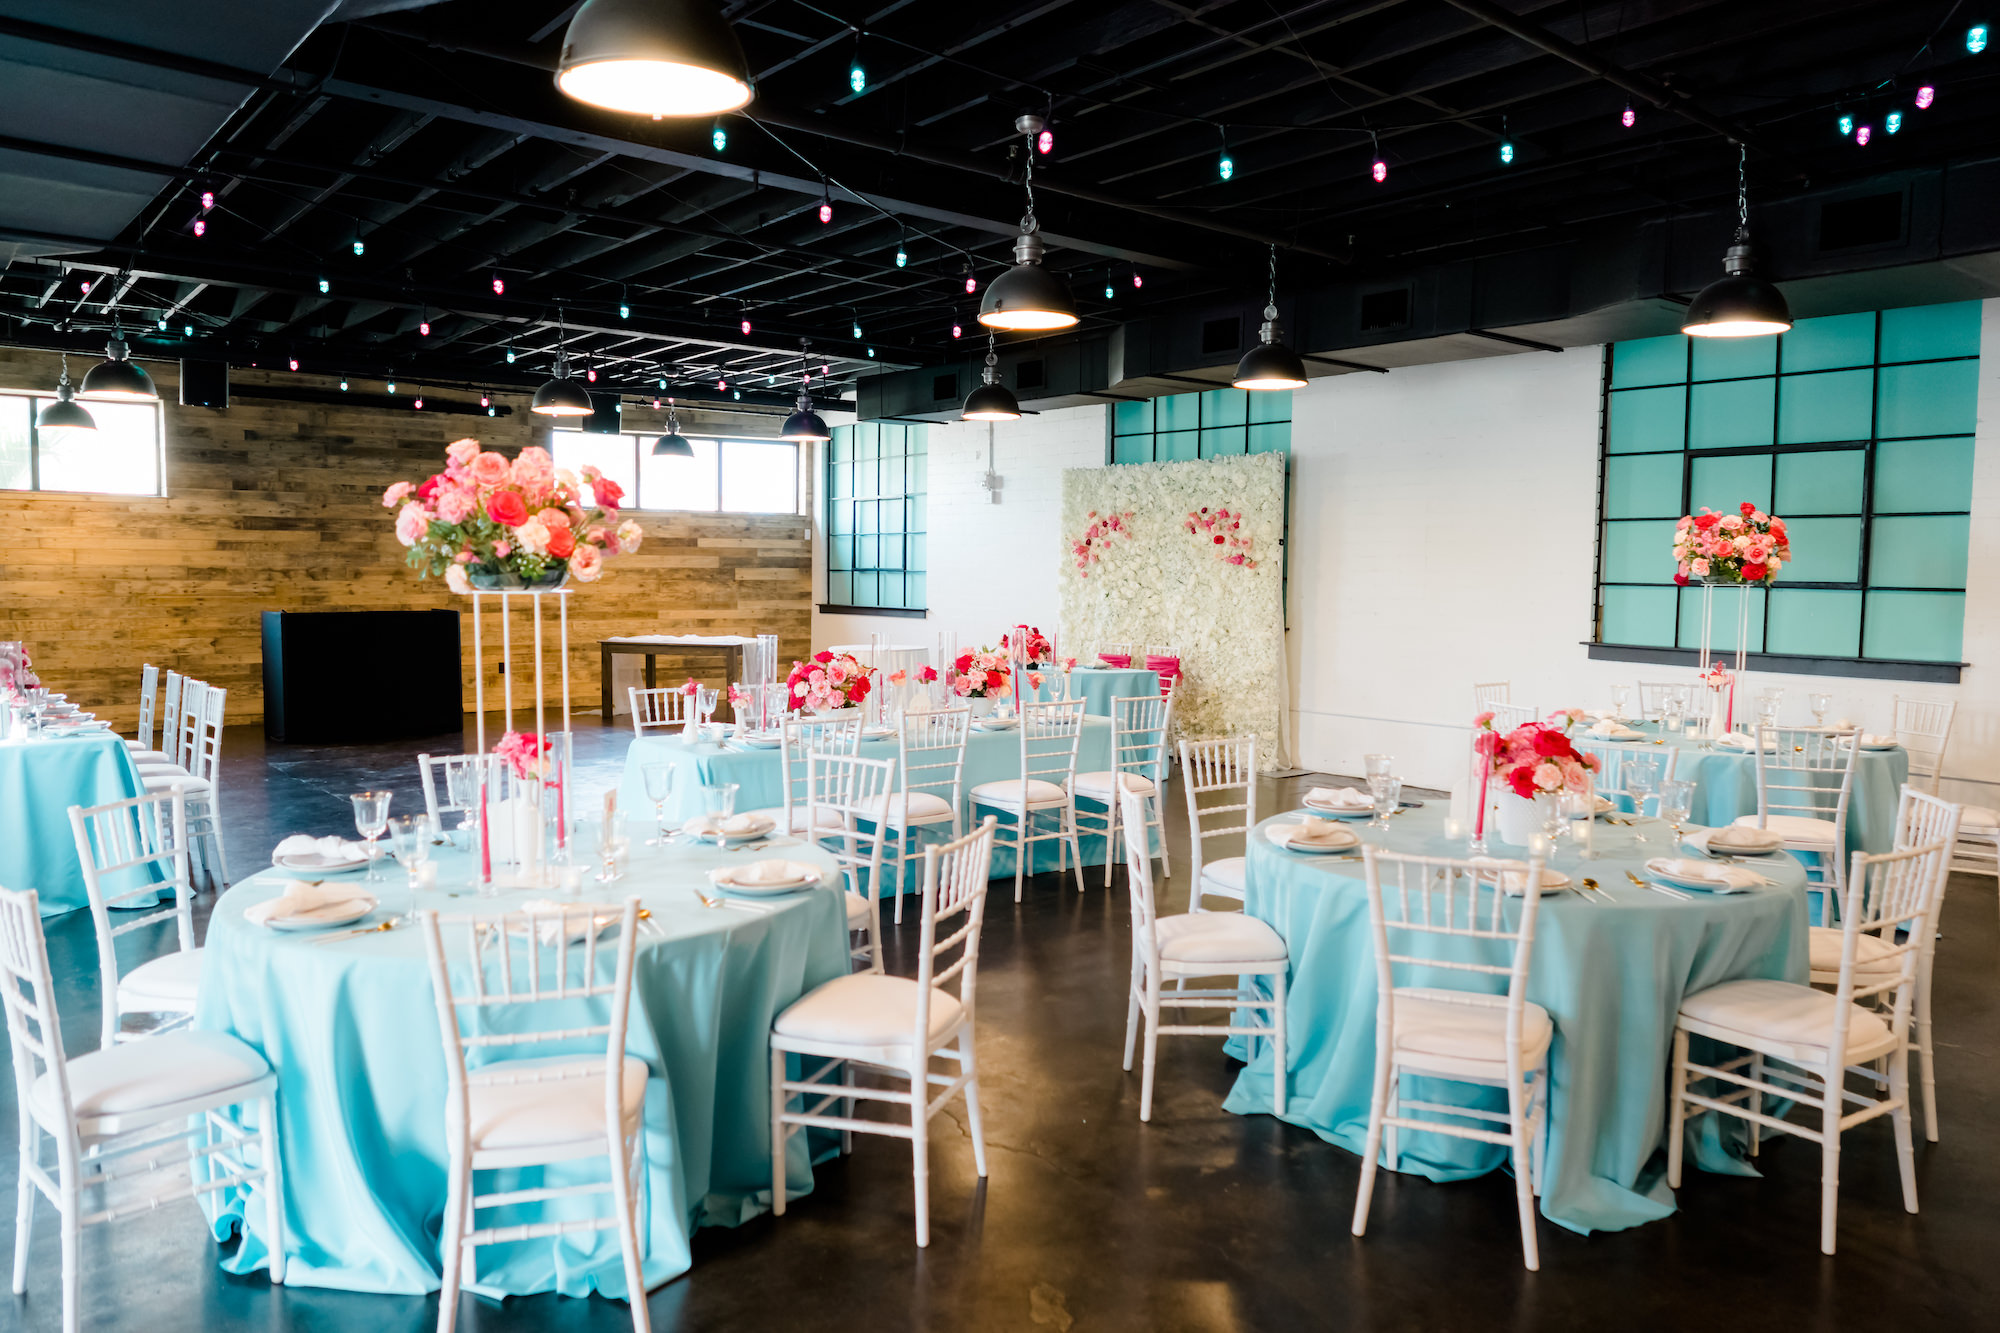 Summer Wedding Reception Decor, Turquoise Table Linens, White Chiavari Chairs, Pink and Fuchsia Floral Centerpieces | Tampa Bay Wedding Venue The West Events | White Chair Rentals Gabro Event Services